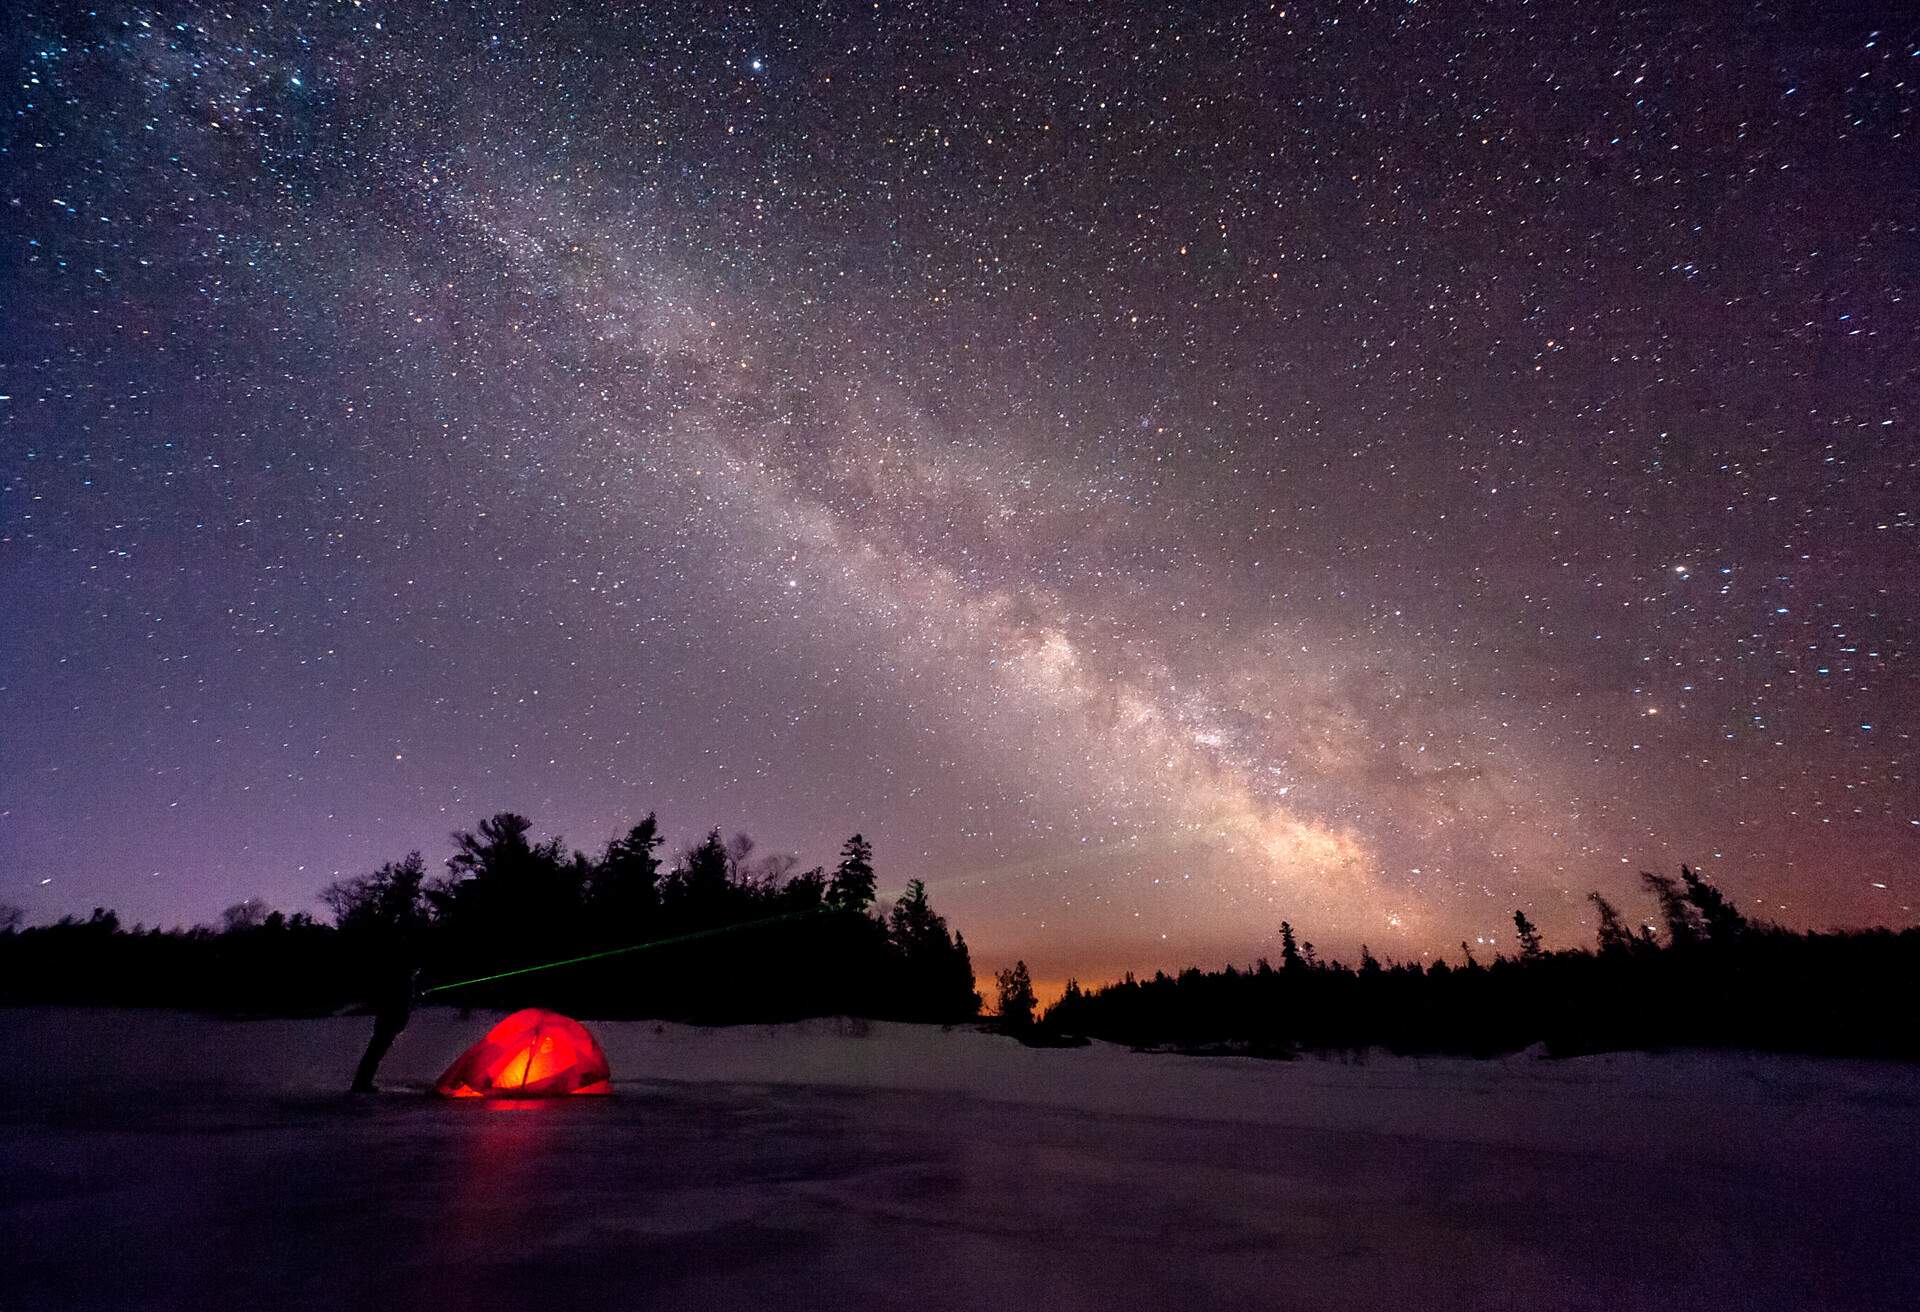 An orange tent glows at night under the constellation of stars.